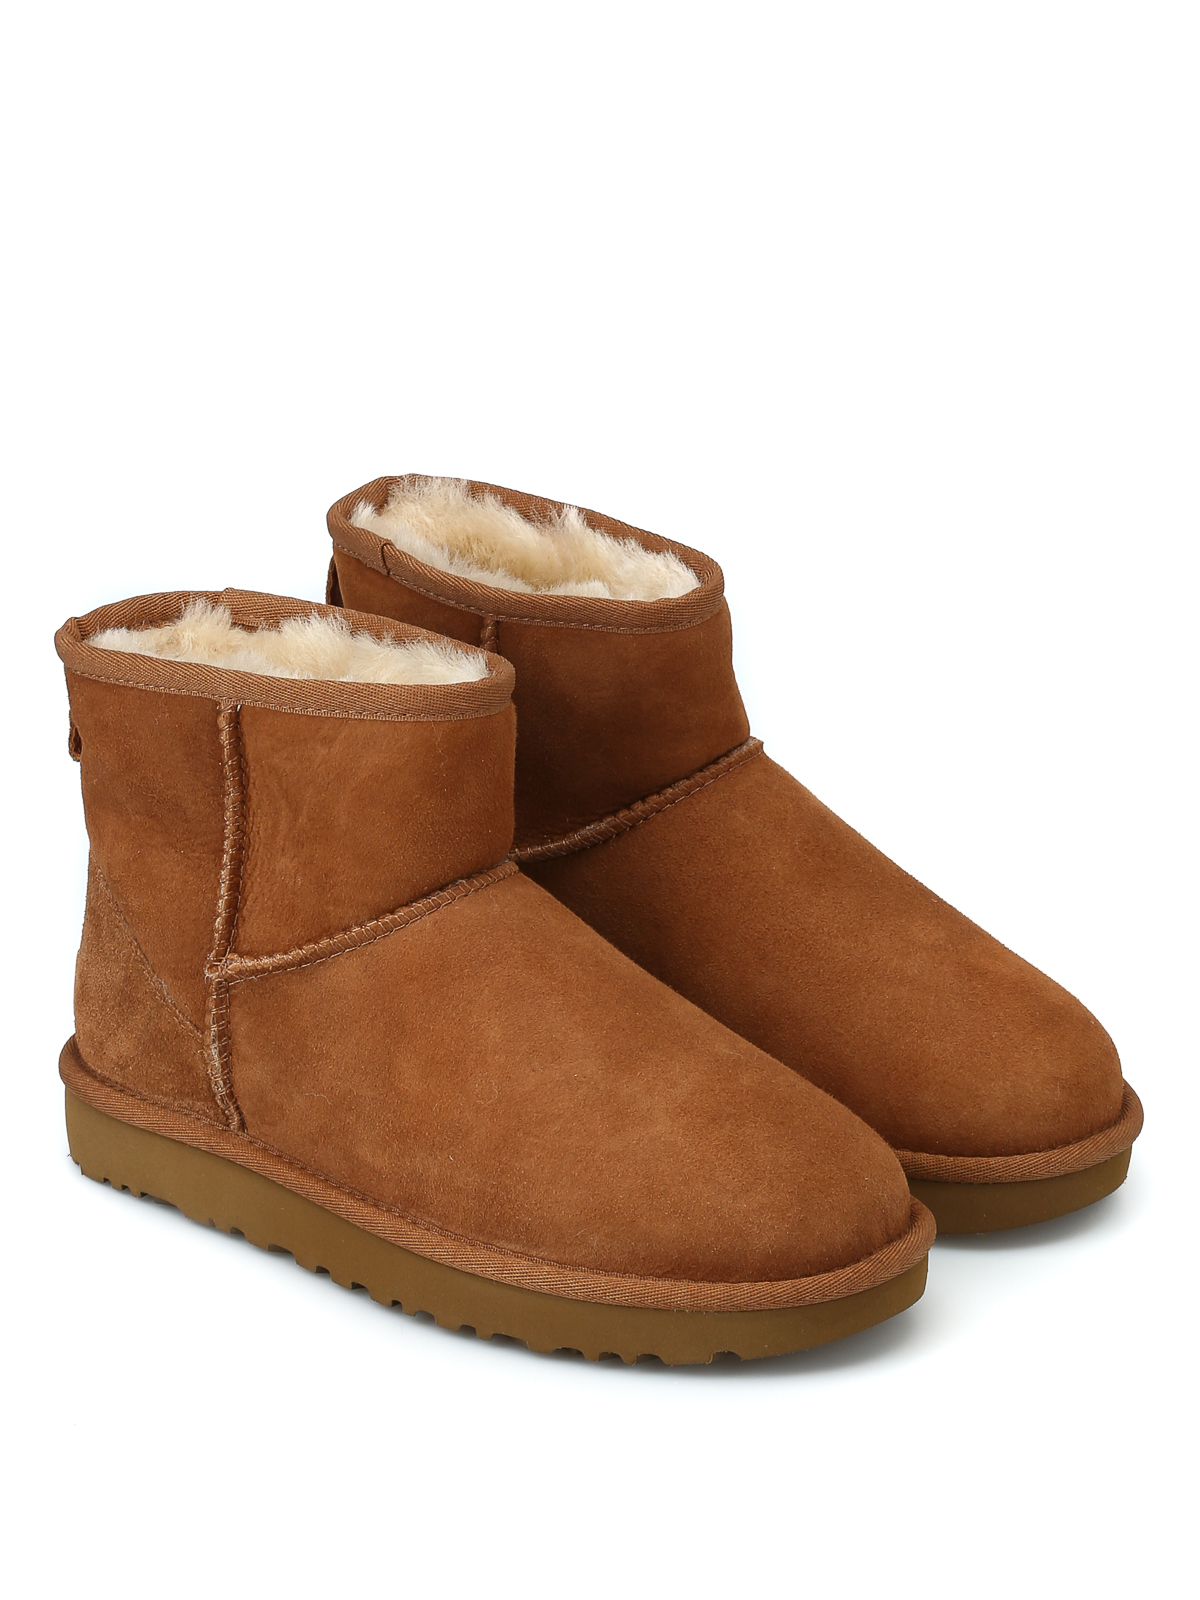 Classic Mini II ankle boots by Ugg - ankle boots | iKRIX